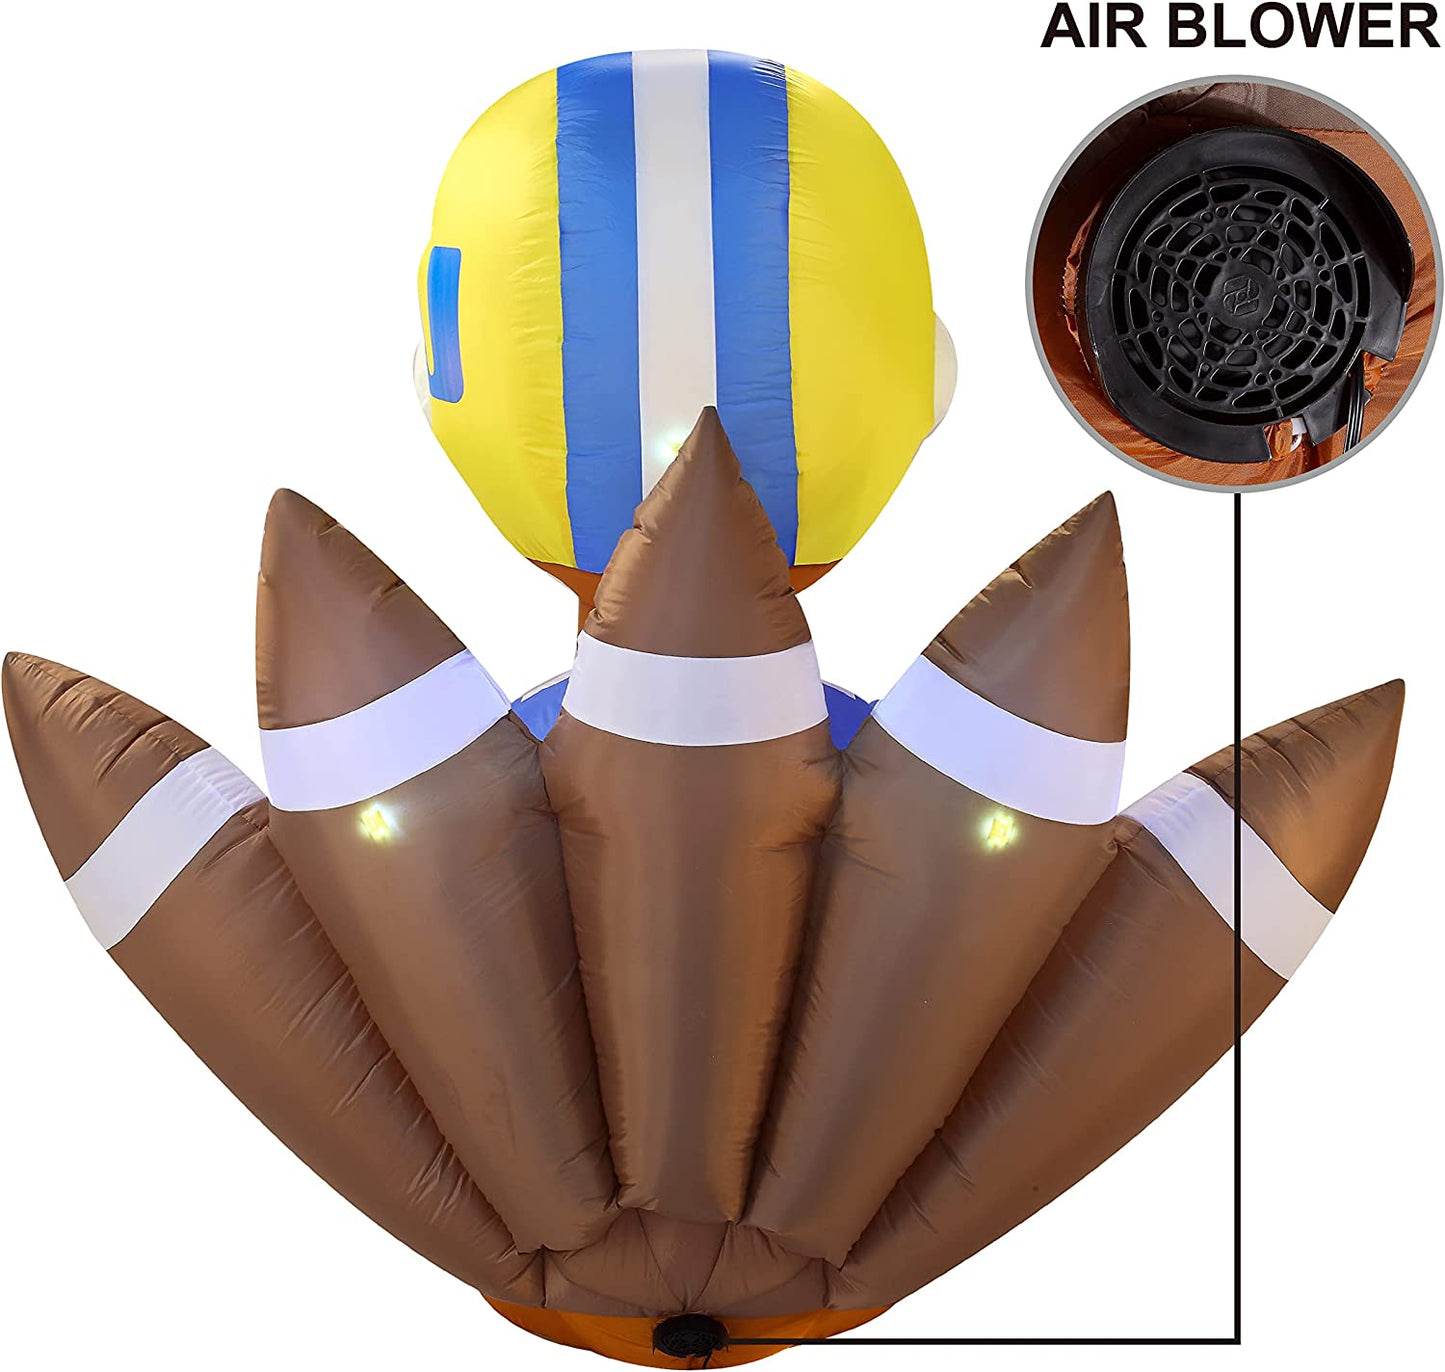 Inflatable Turkey Football Player, 6ft